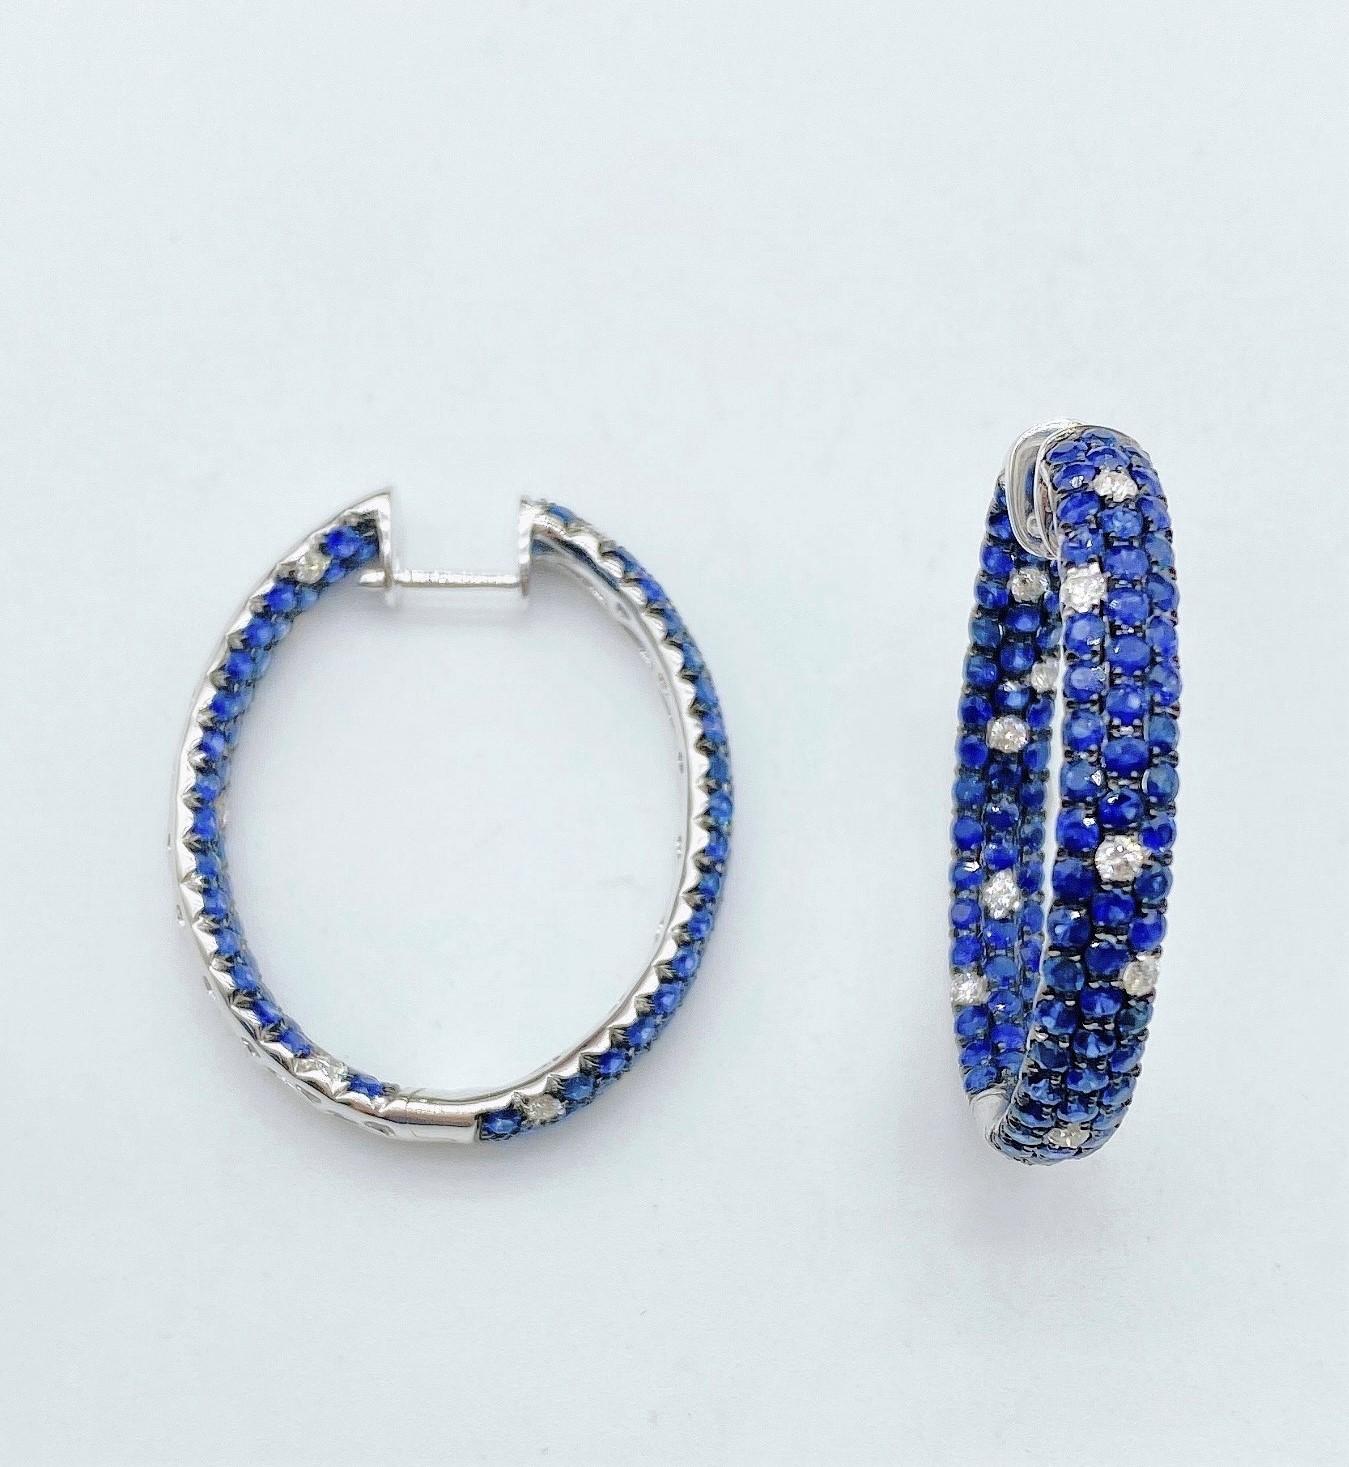 The Following Items we are offering is a Rare Important Radiant Pair of 18KT Gold Large Glistening Magnificent Large Fancy Blue Sapphire and Diamond Hoop Earrings. Stones are Very Clean and Extremely Fine! T.C.W. Approx 5.50CTS!!! 

Comes New with